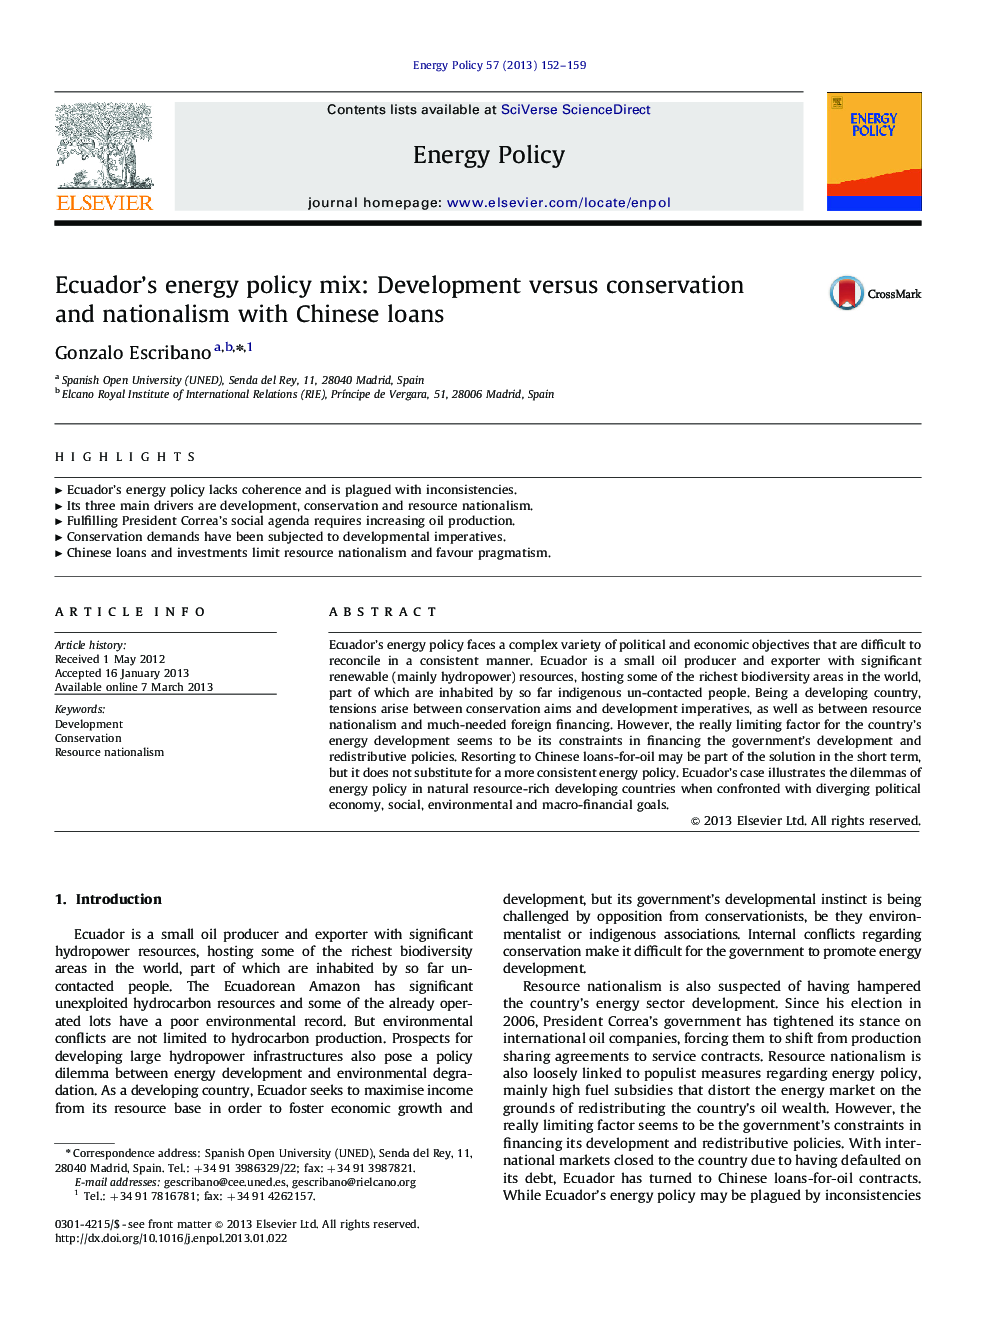 Ecuador's energy policy mix: Development versus conservation and nationalism with Chinese loans